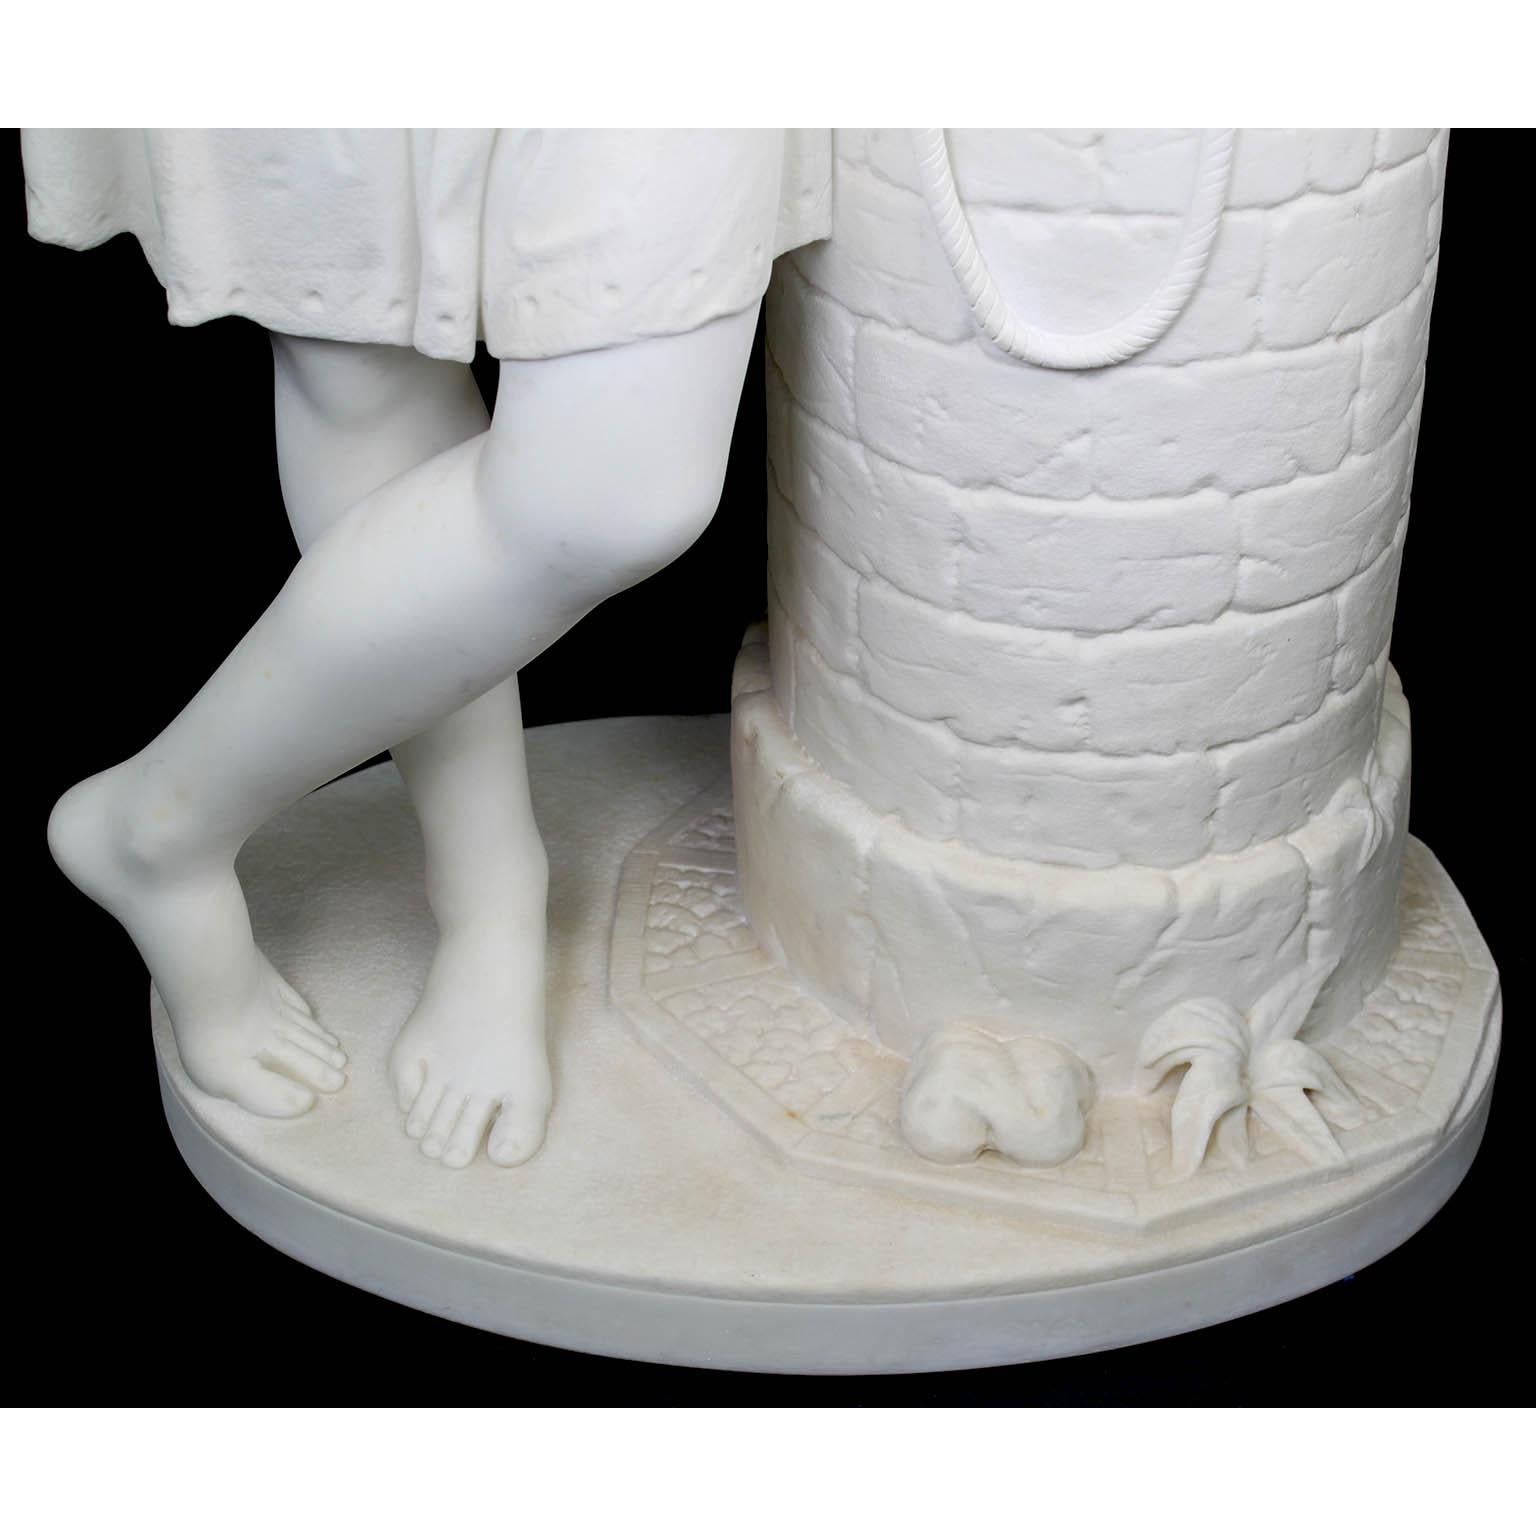 Fine 19th Century White Marble Sculpture of “Rebecca at the Well” For Sale 6